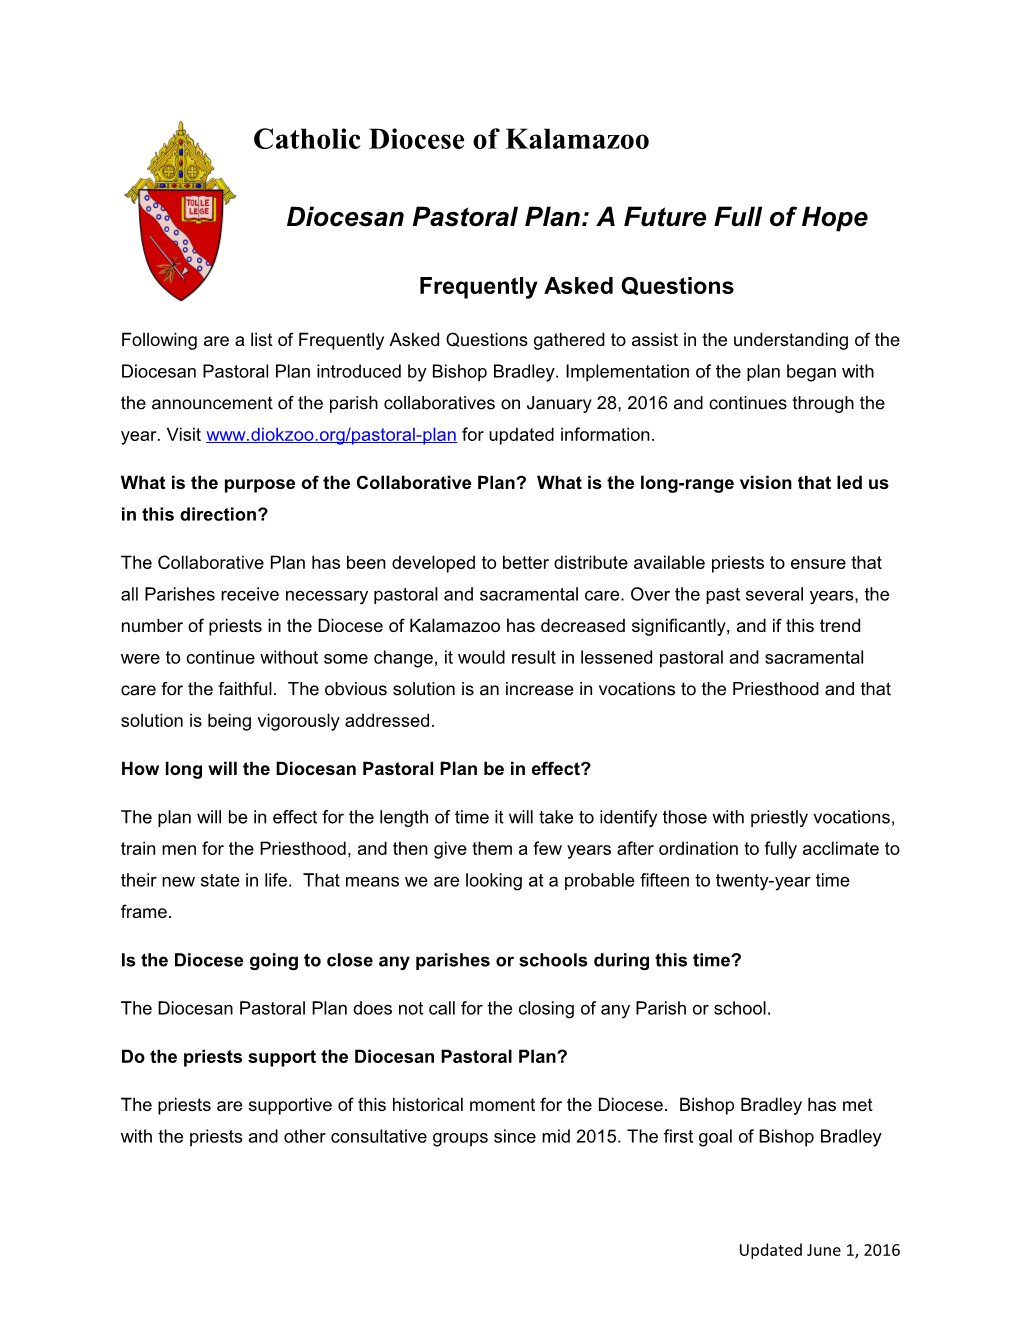 Diocesan Pastoral Plan: a Future Full of Hope Frequently Asked Questions